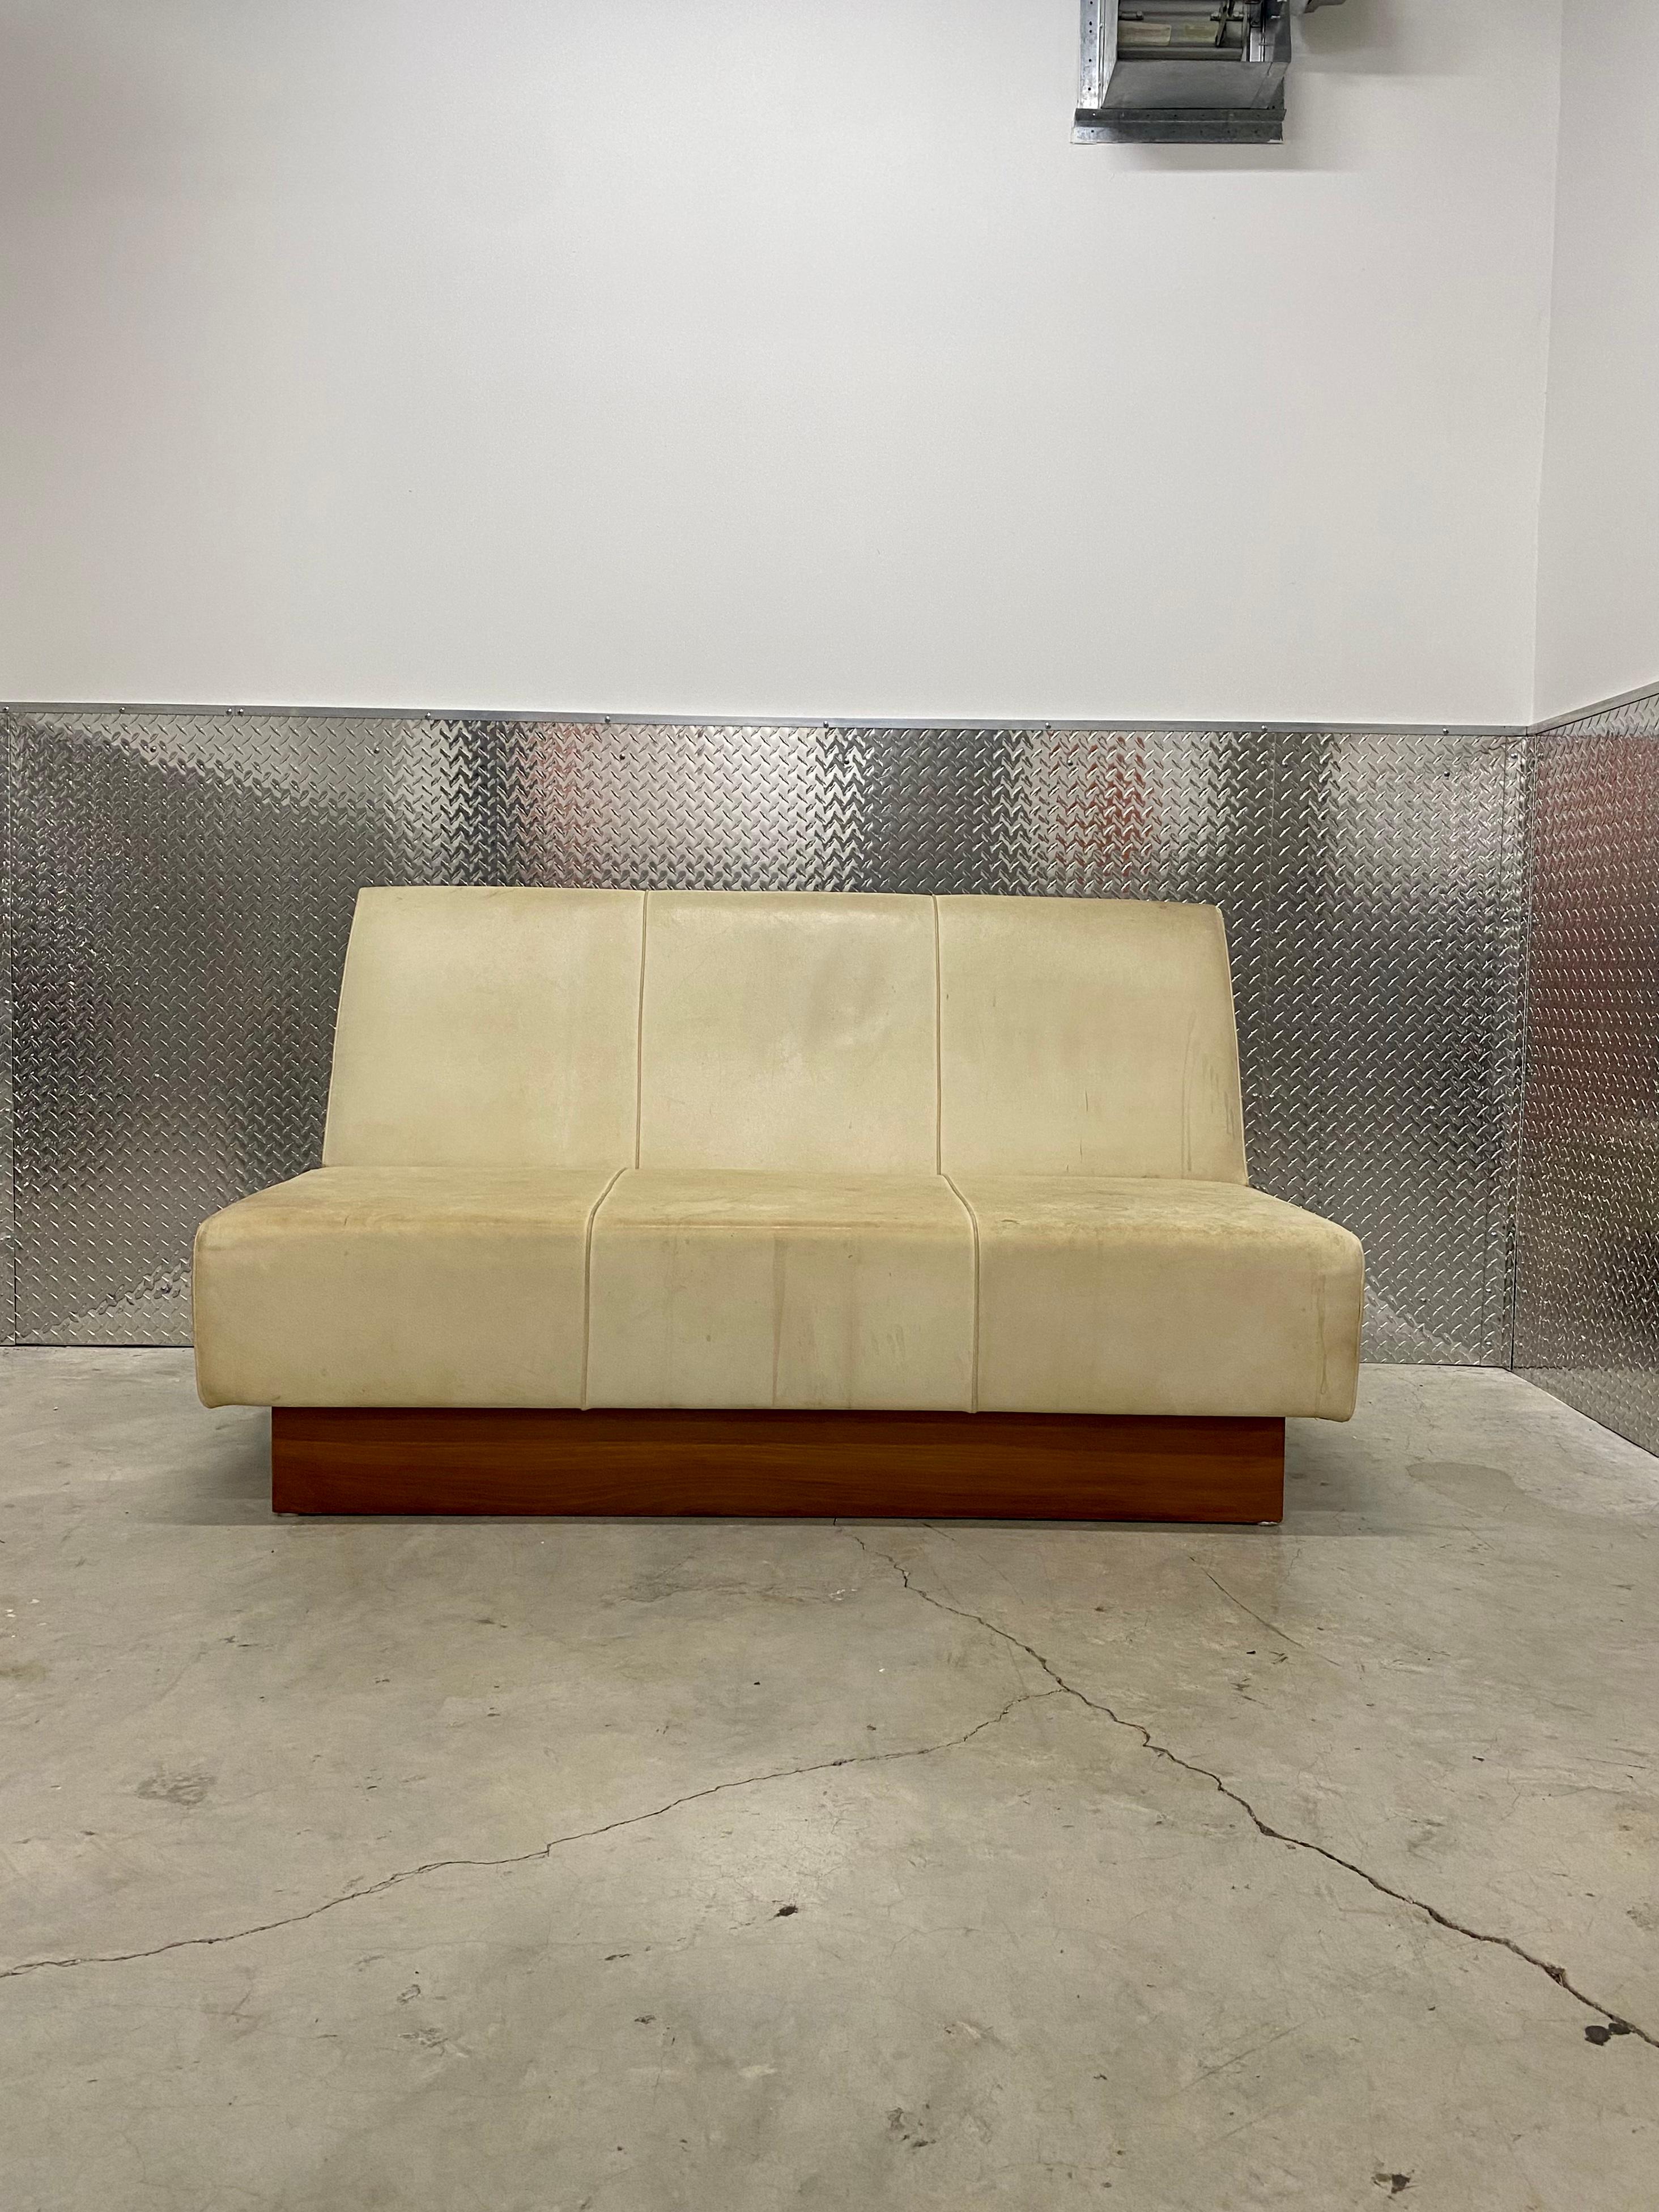 1960s Milo Baughman Leather Plinth Floating Sofa and Chairs, Set of 3 For Sale 3